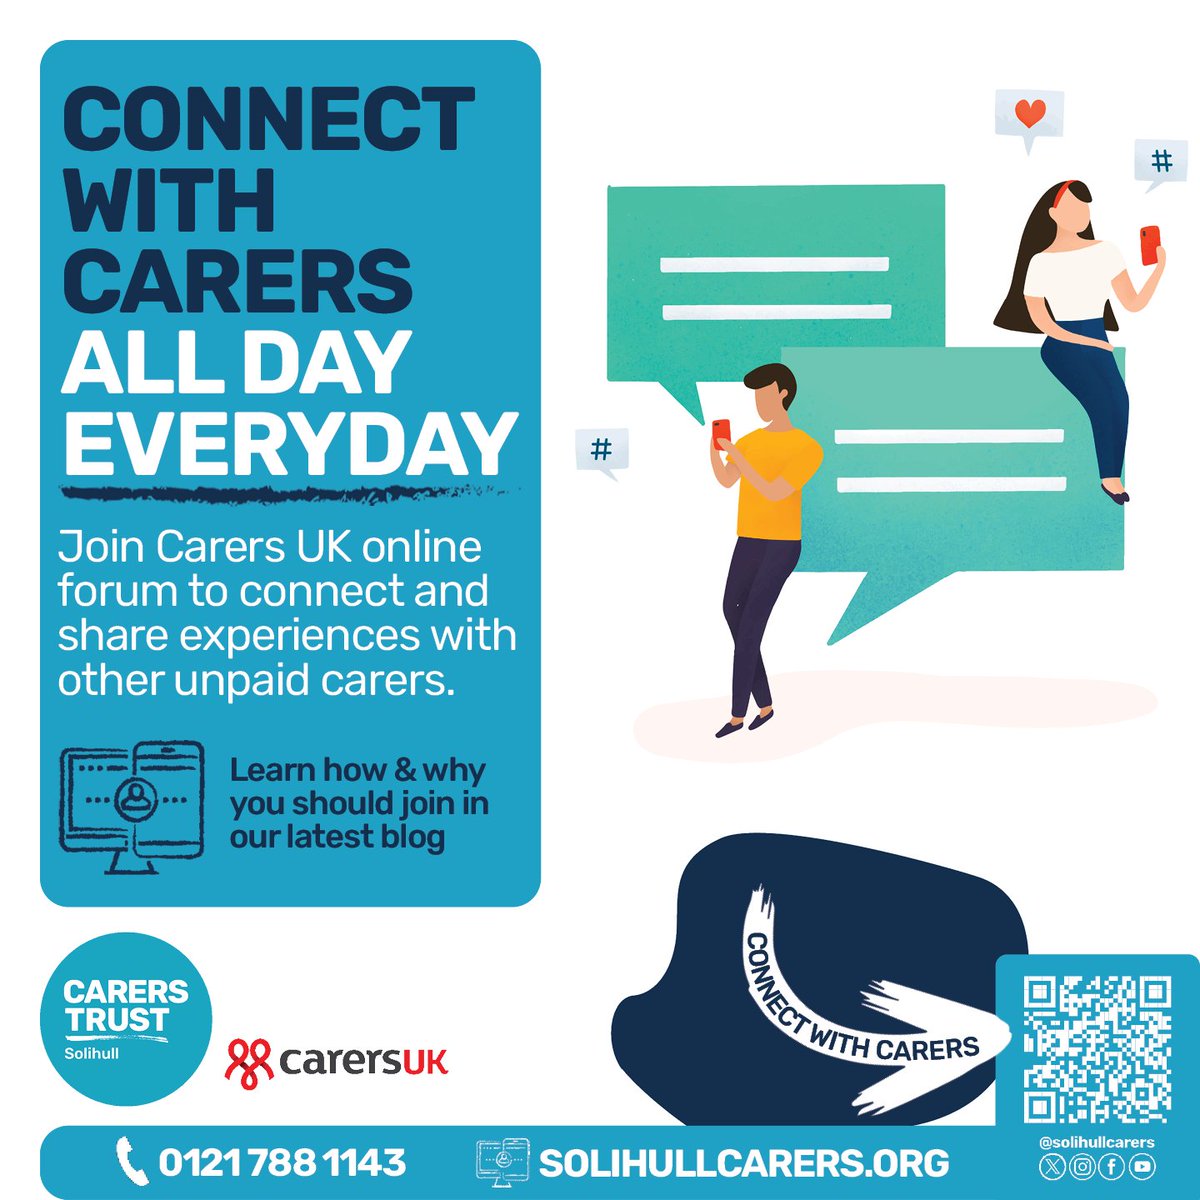 Stay connected 24 hours a day 7 days a week with other #unpaidcarers with the help of @CarersUK online forum. Thousands of #carers are already there sharing all things #caring. Join in & stay connected all day, everyday: buff.ly/3W6VGTm #carersforum #connectingcarers